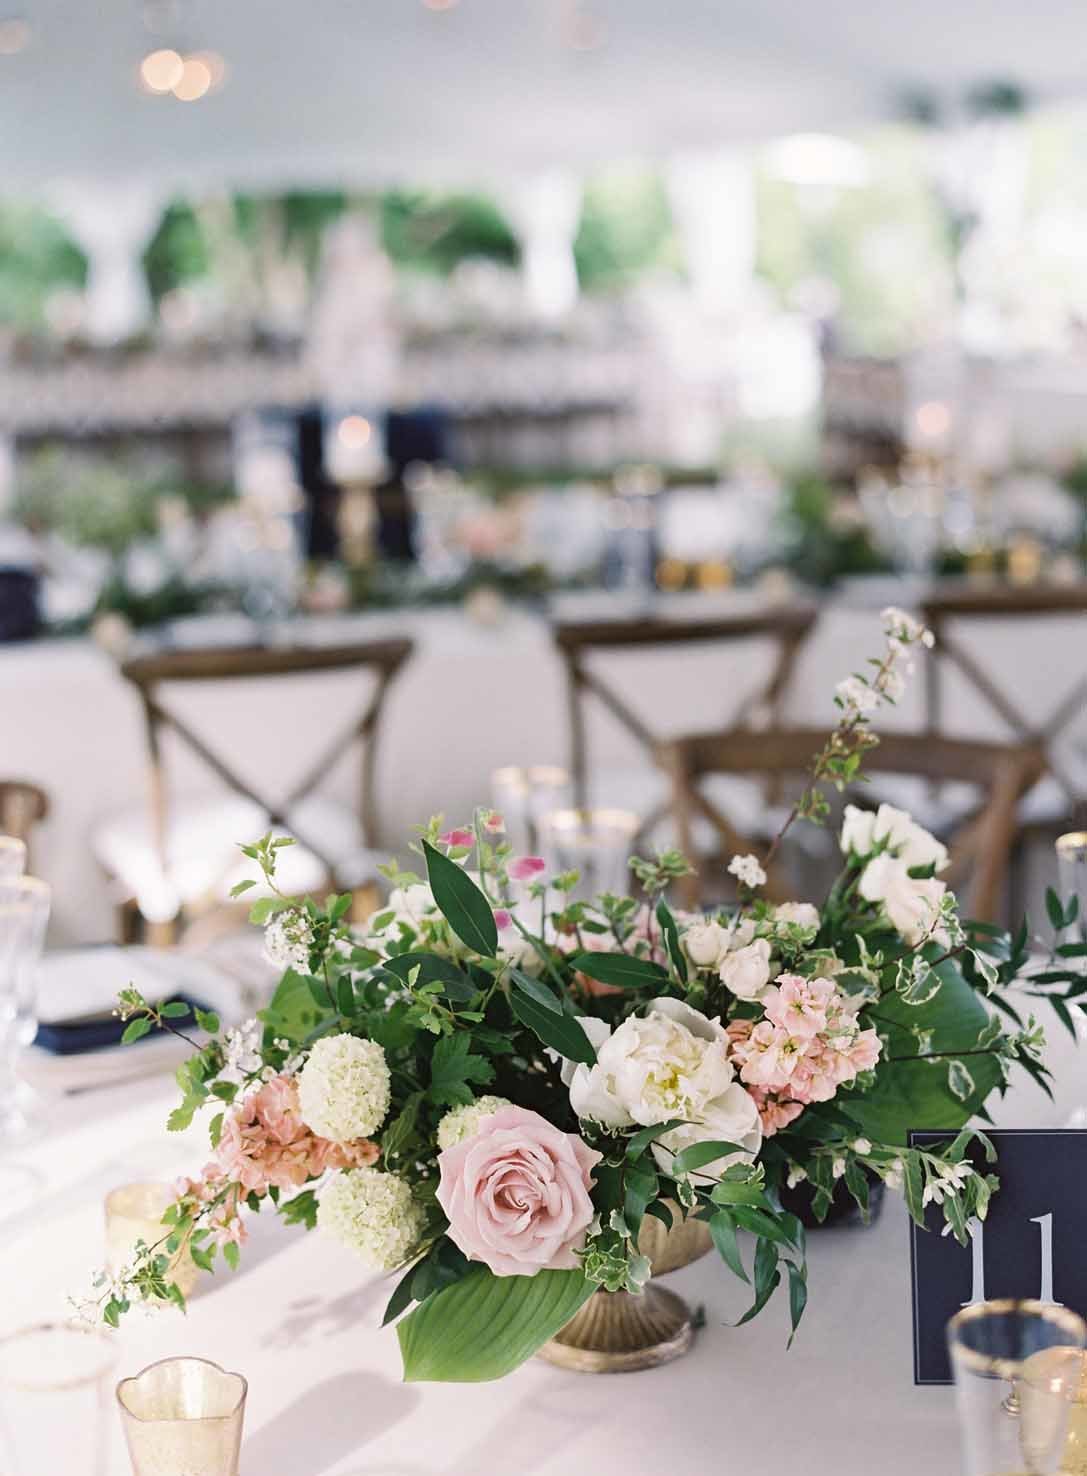 centerpiece of blush roses, white roses, ranunculus, and greenery in gold compote